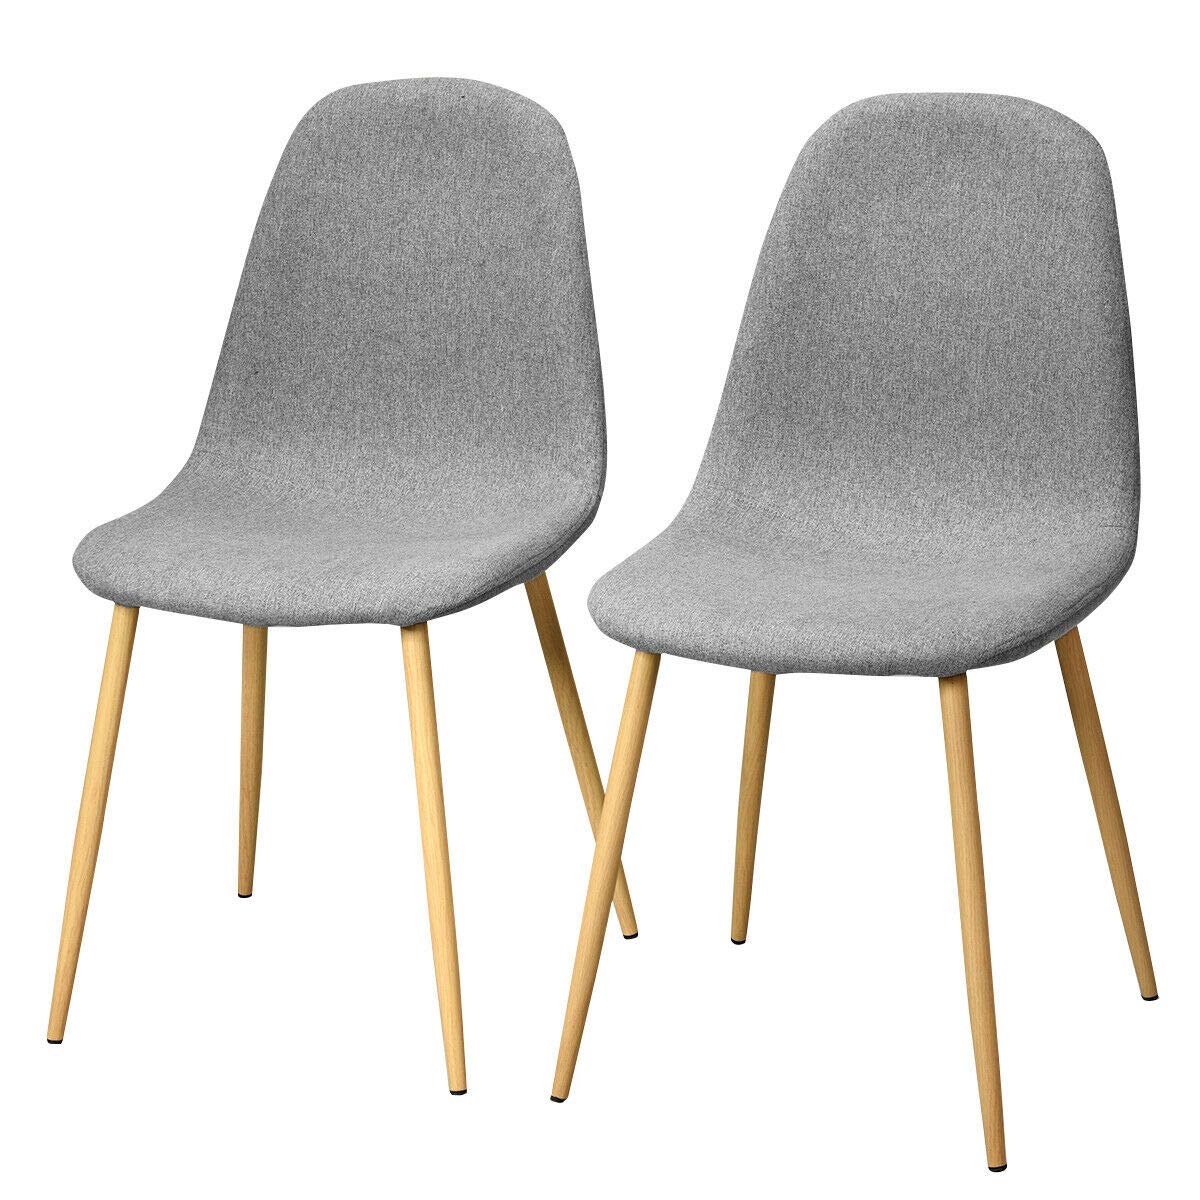 Giantex Dining Side Chairs Set of 2 Sturdy Metal Legs Wood Look Fabric Cushion Seat Back Home Dining Room Furniture Chairs Set, Gray